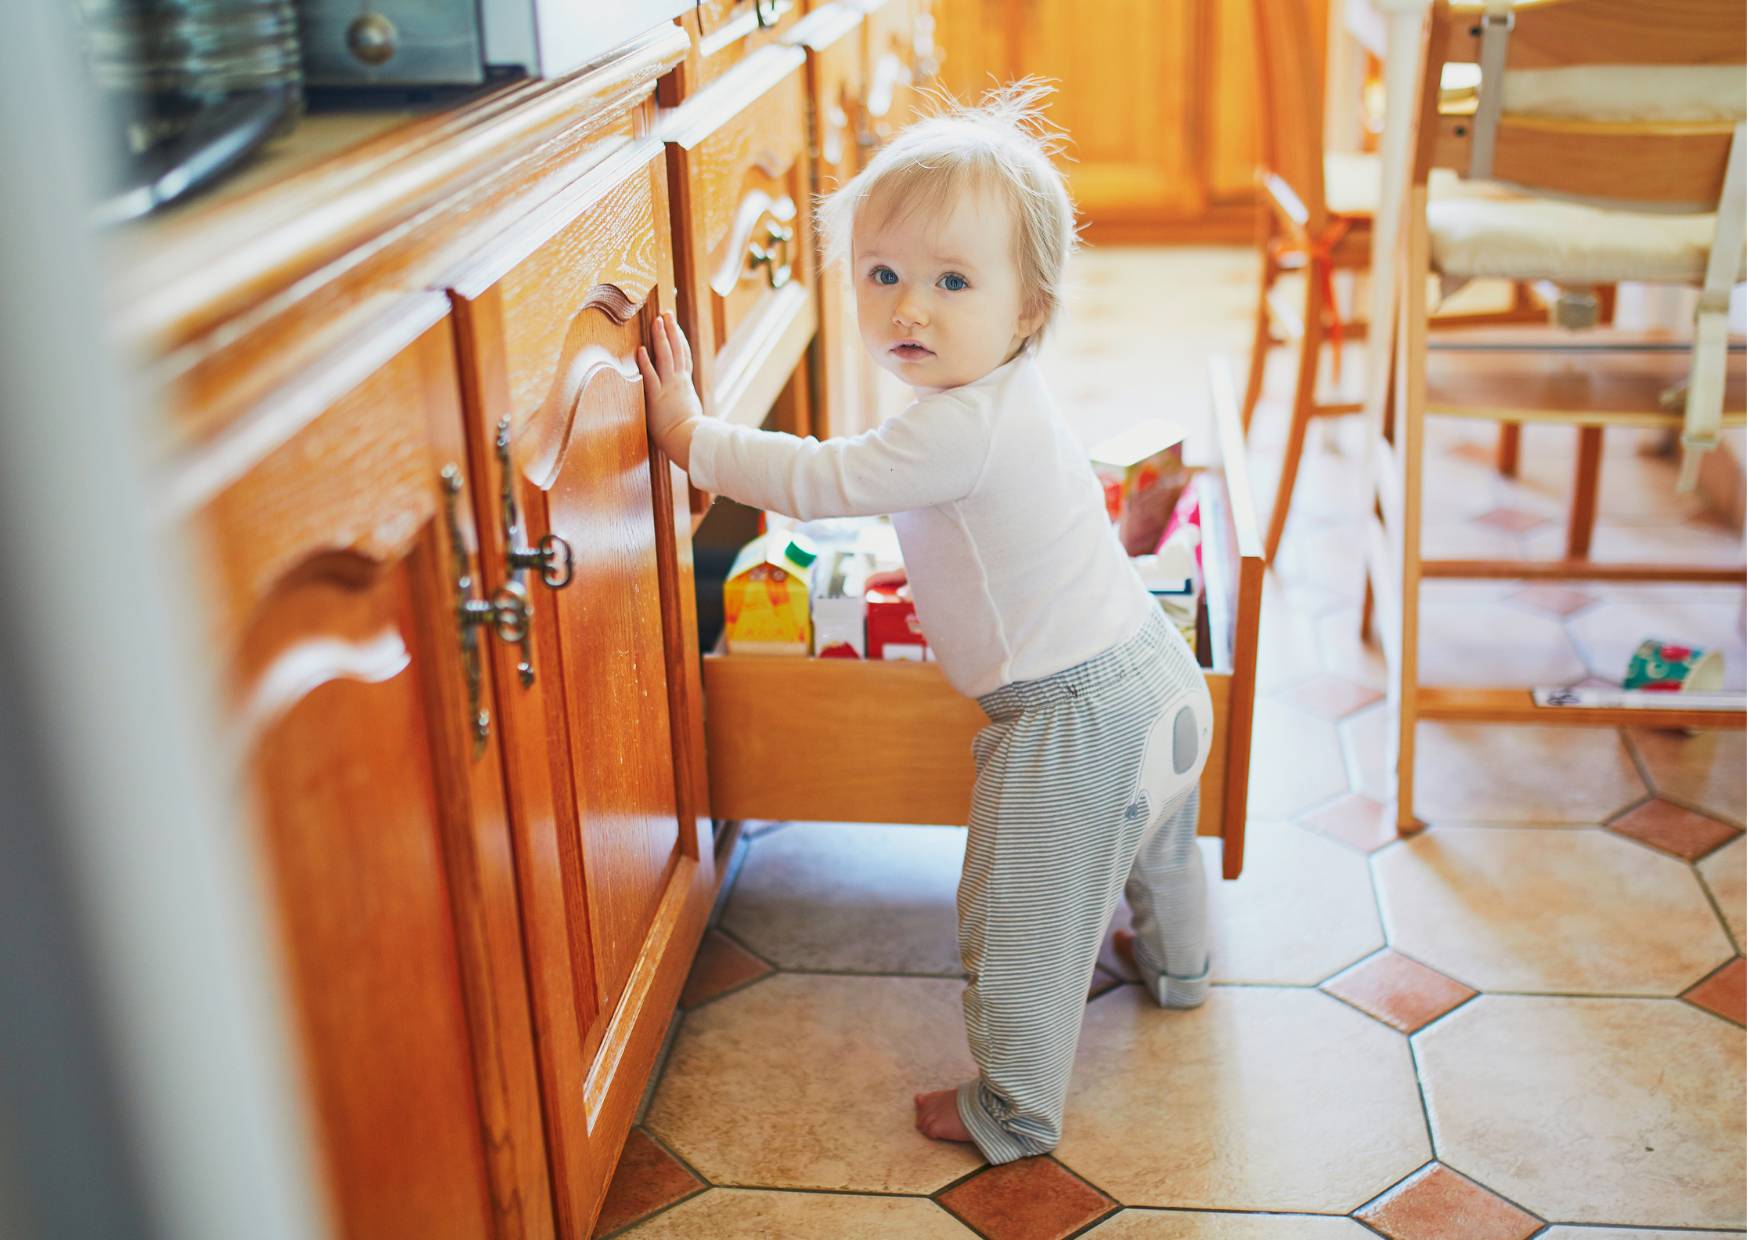 4 Baby-proofing Tips to Make Sure the Home Is Ready